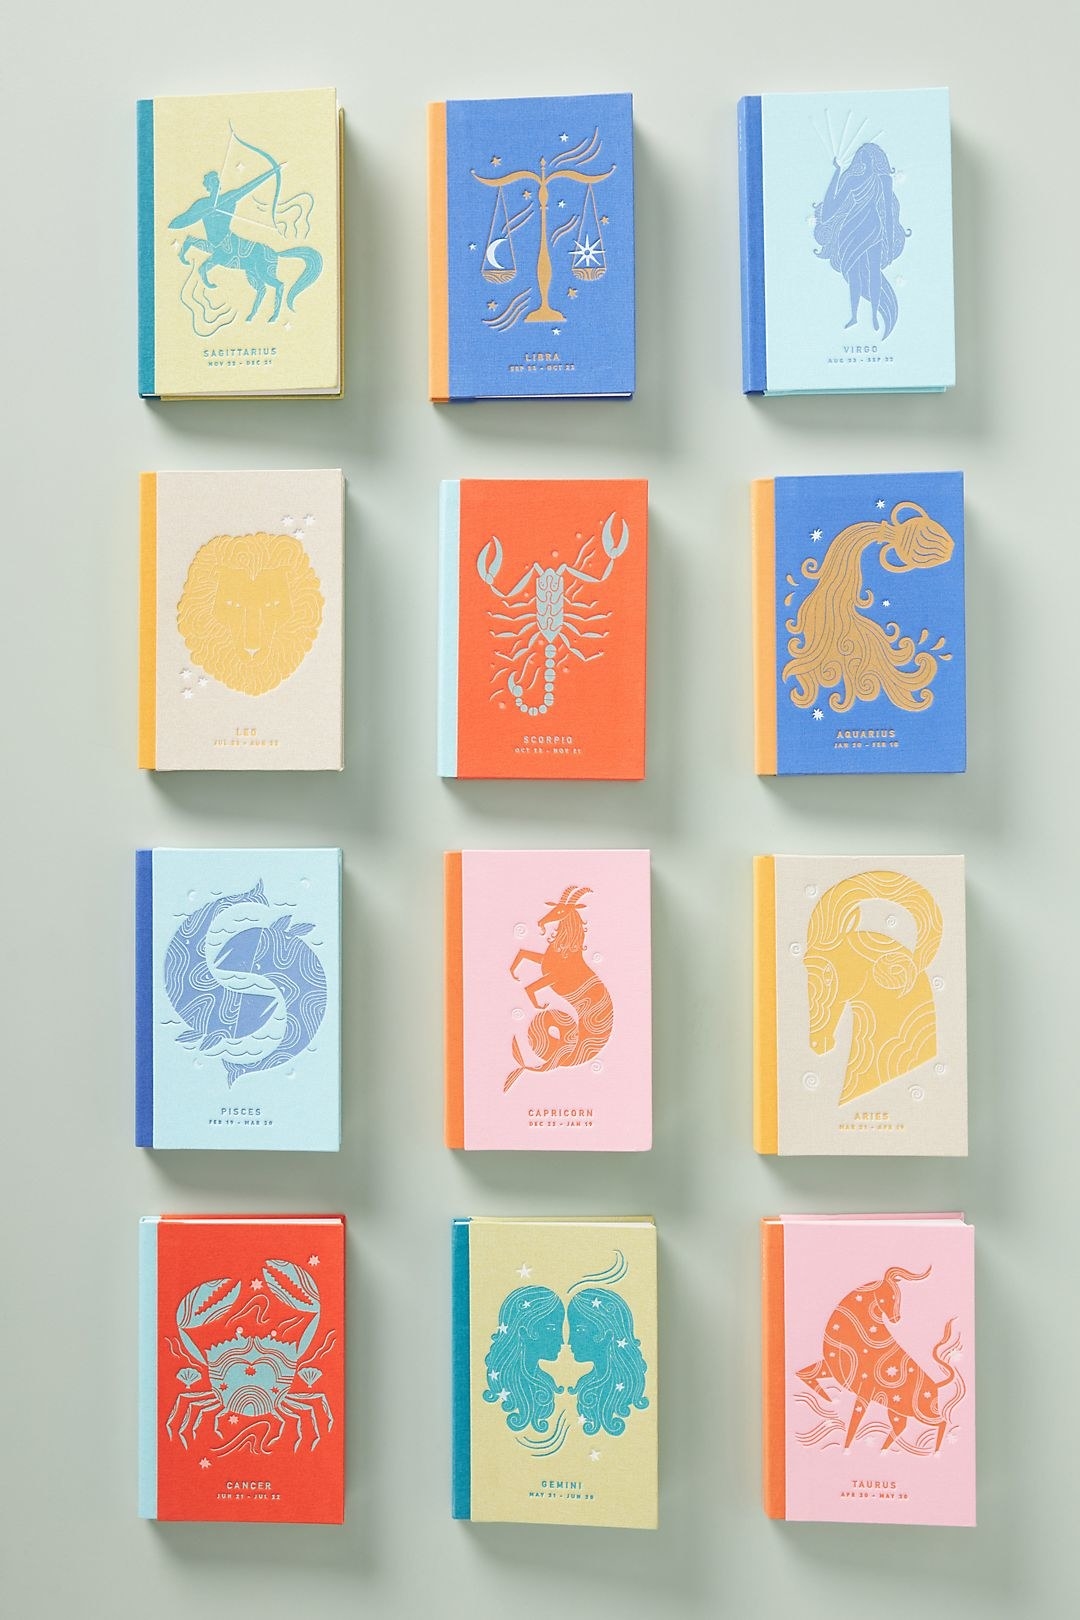 12 different zodiac journals with colorful covers